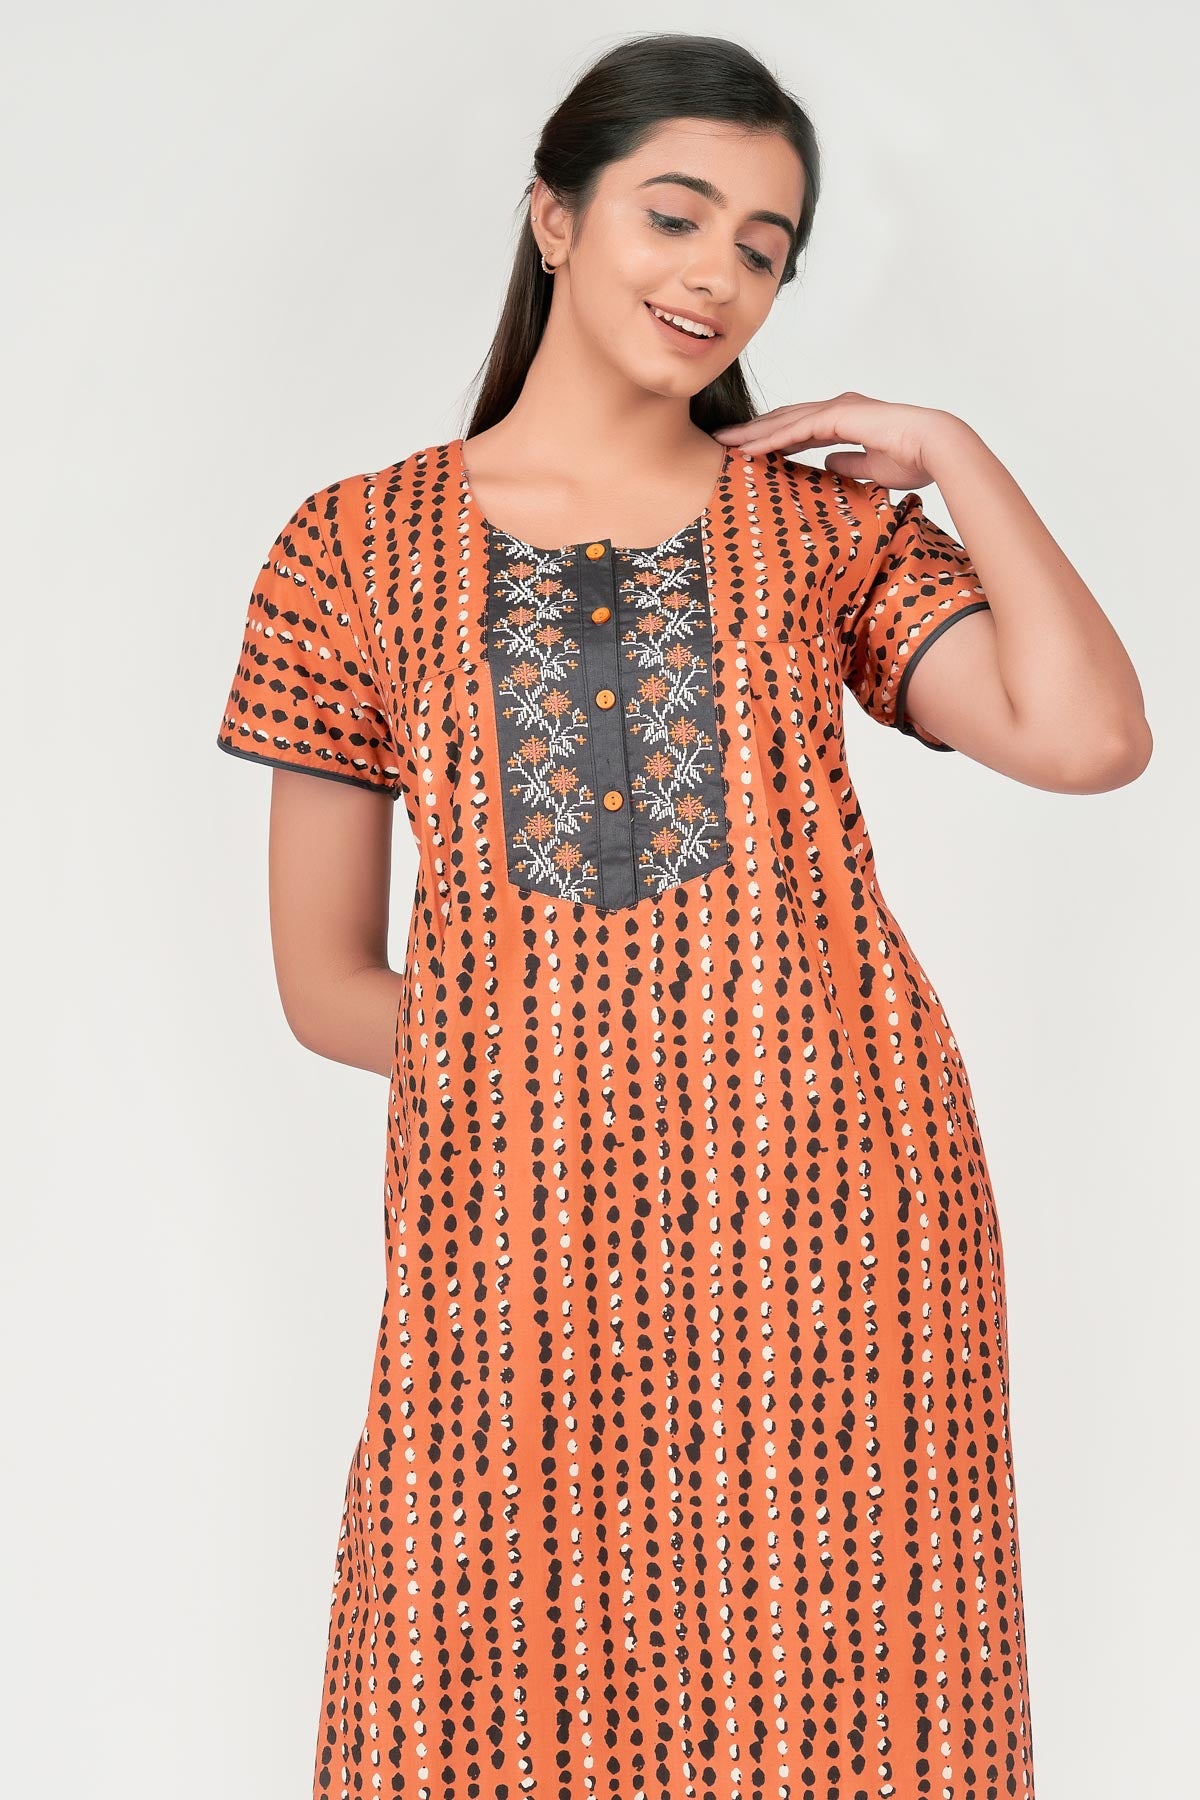 Animal Printed & Abstract Embroidered Nighty - Peach